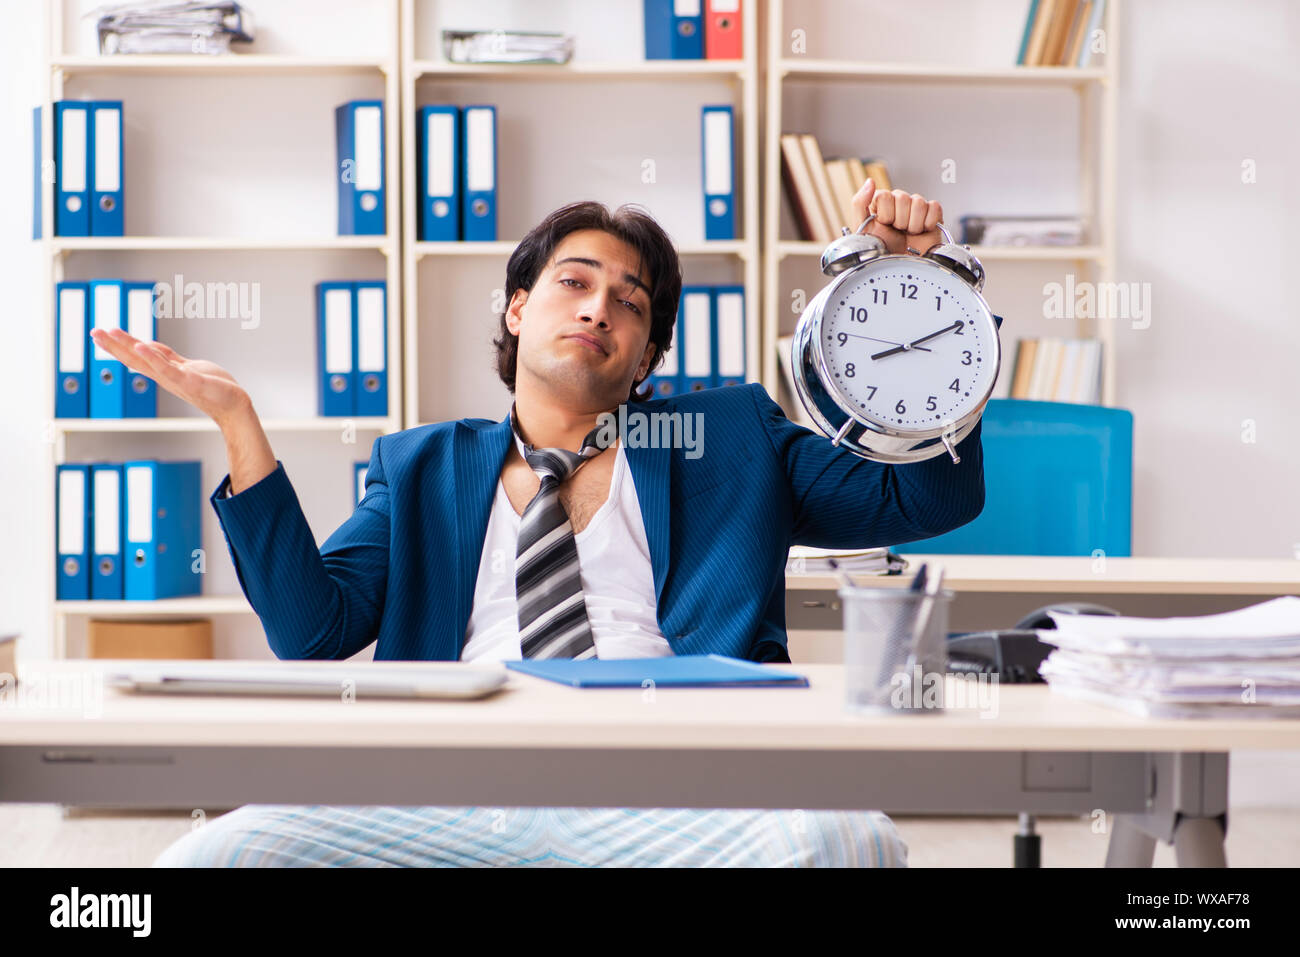 Employee coming to work straight from bed Stock Photo